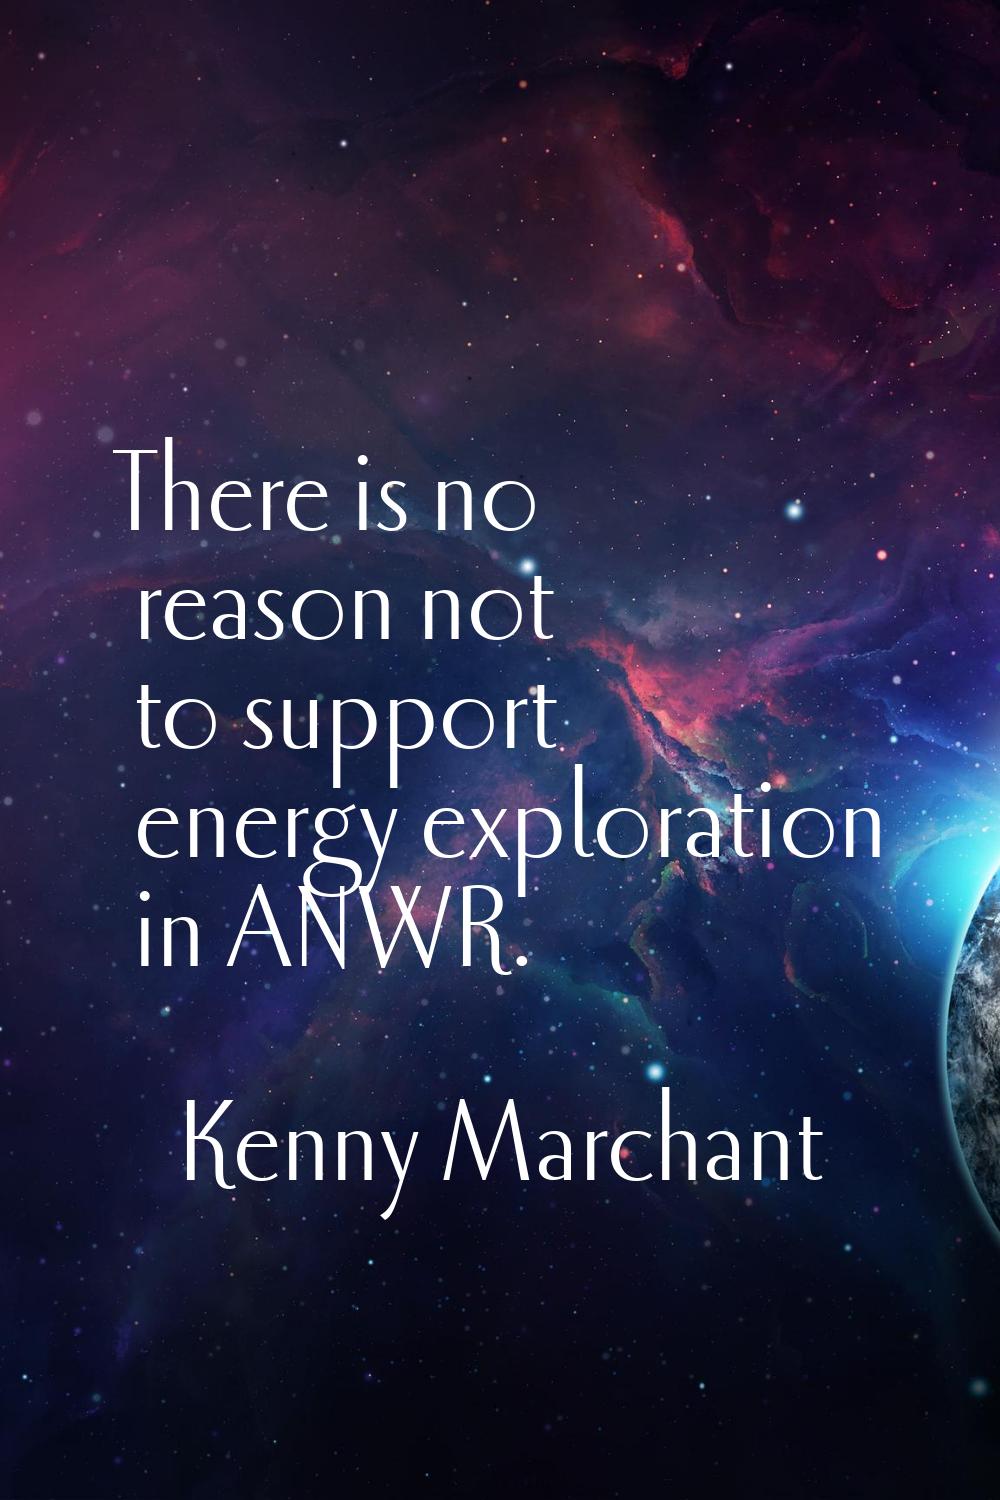 There is no reason not to support energy exploration in ANWR.